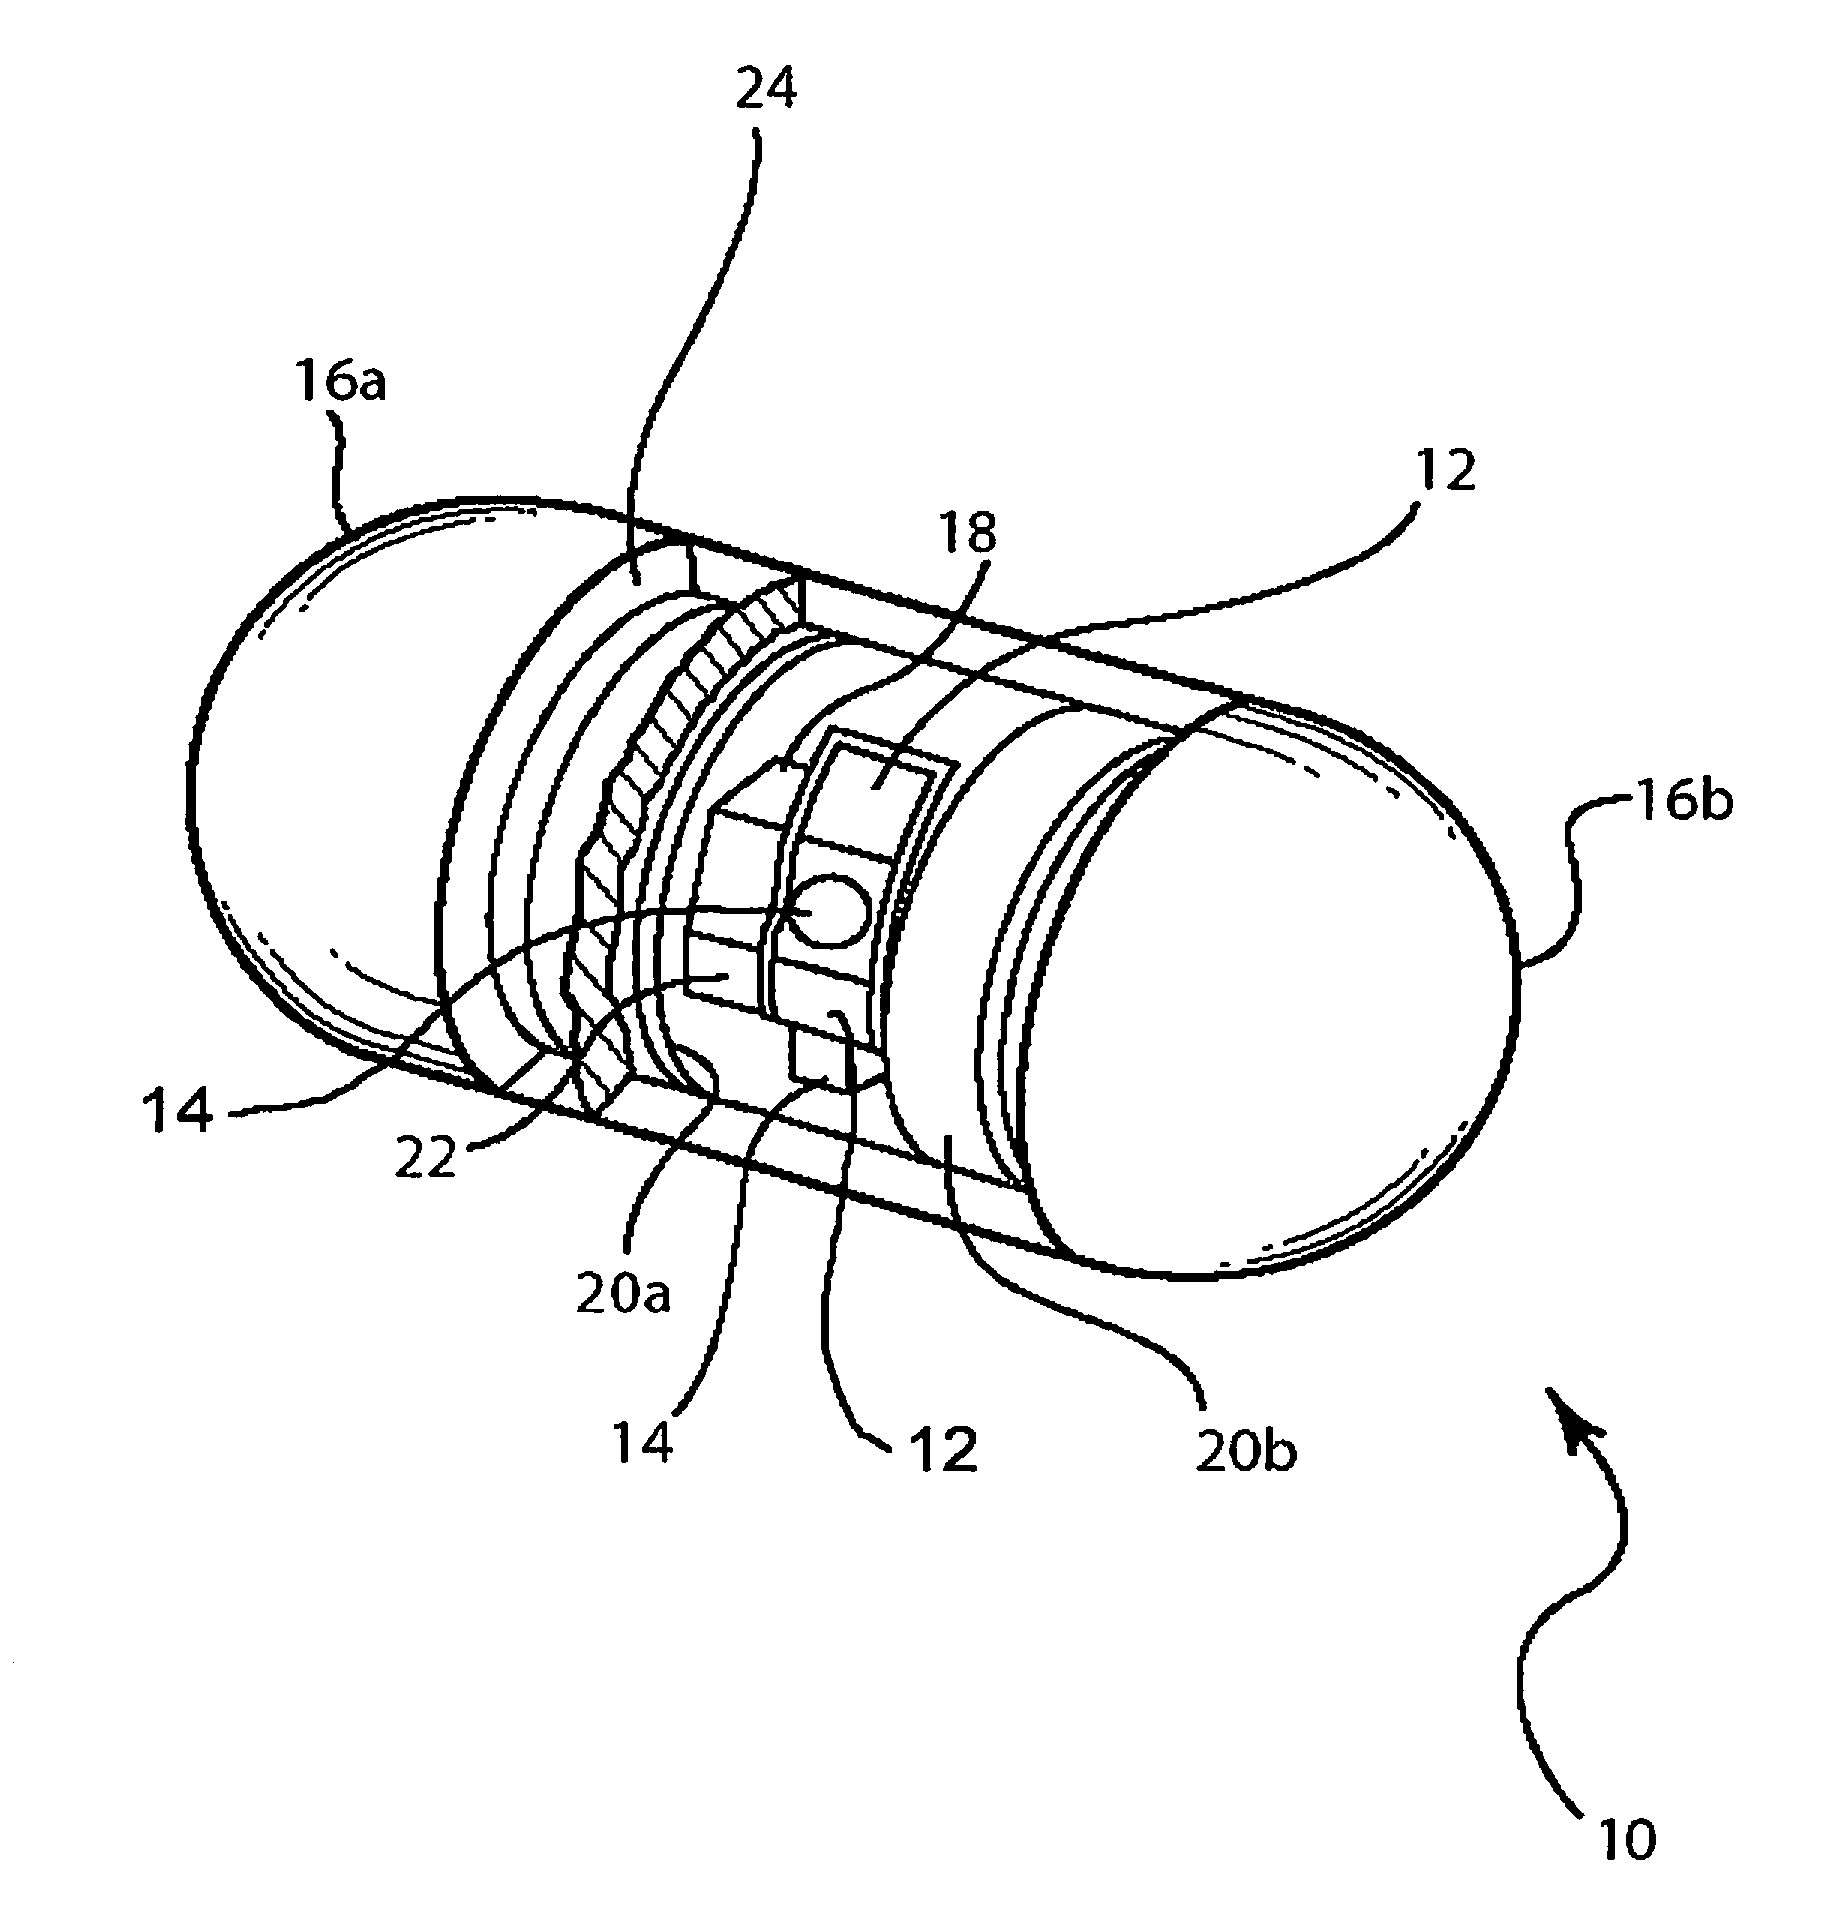 Self-stabilized encapsulated imaging system